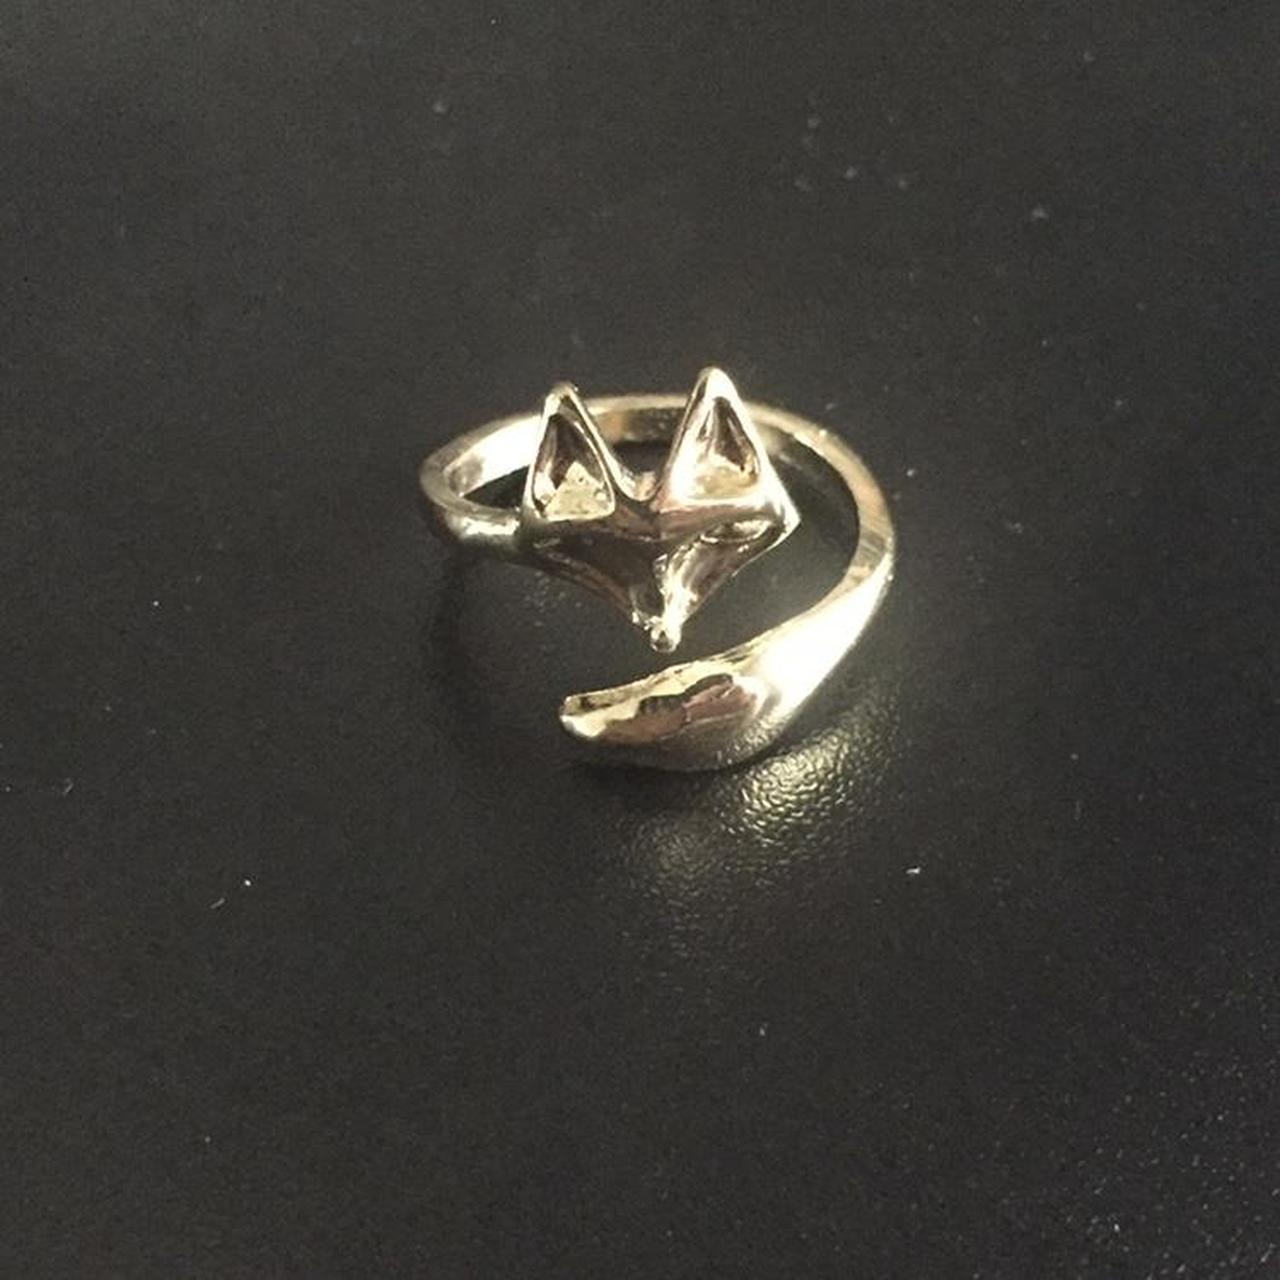 Product Image 4 - Gold fox ring 
Condition: New
Color: